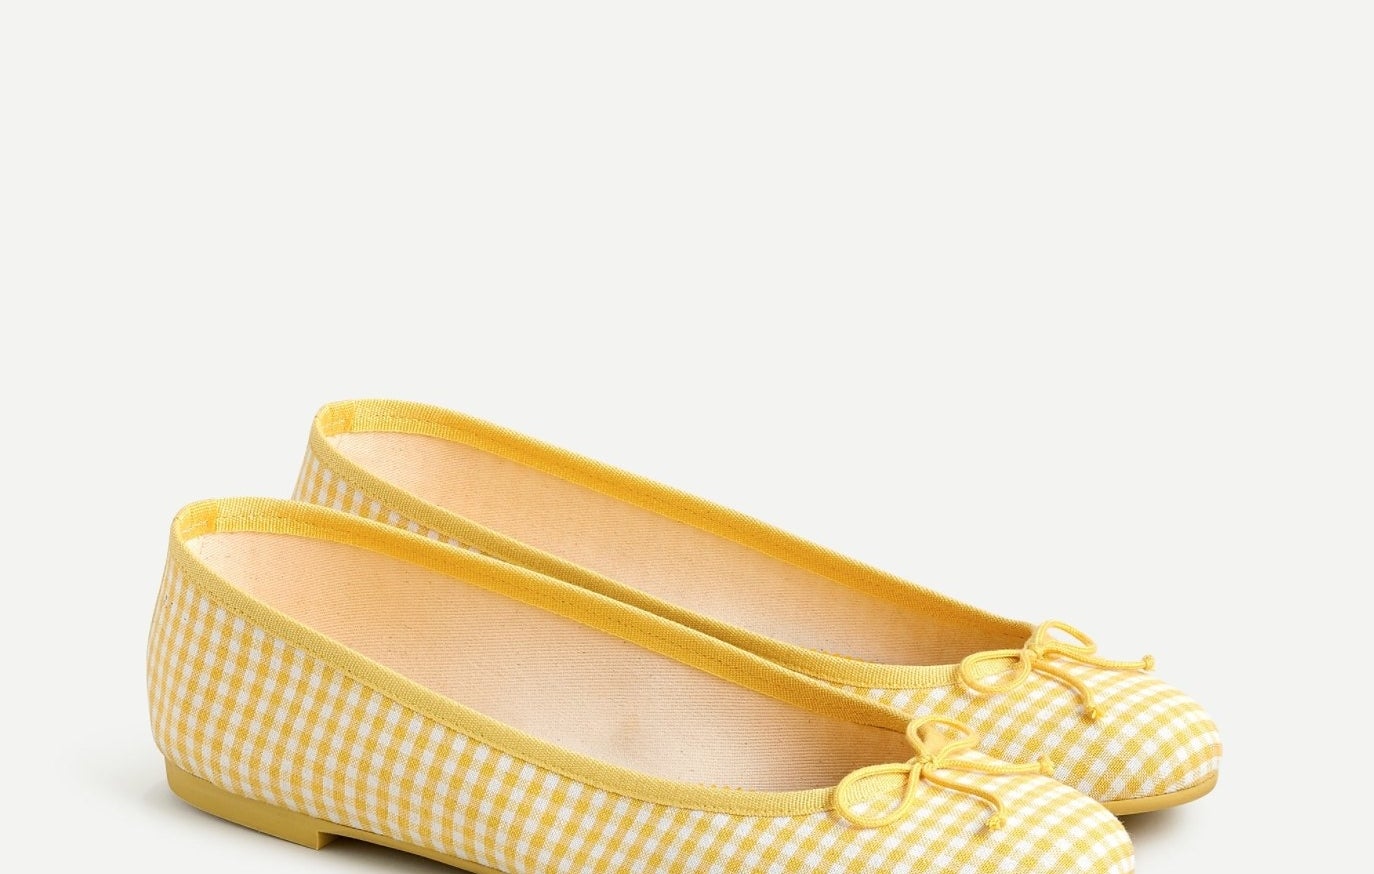 The ballet flats in yellow/ivory